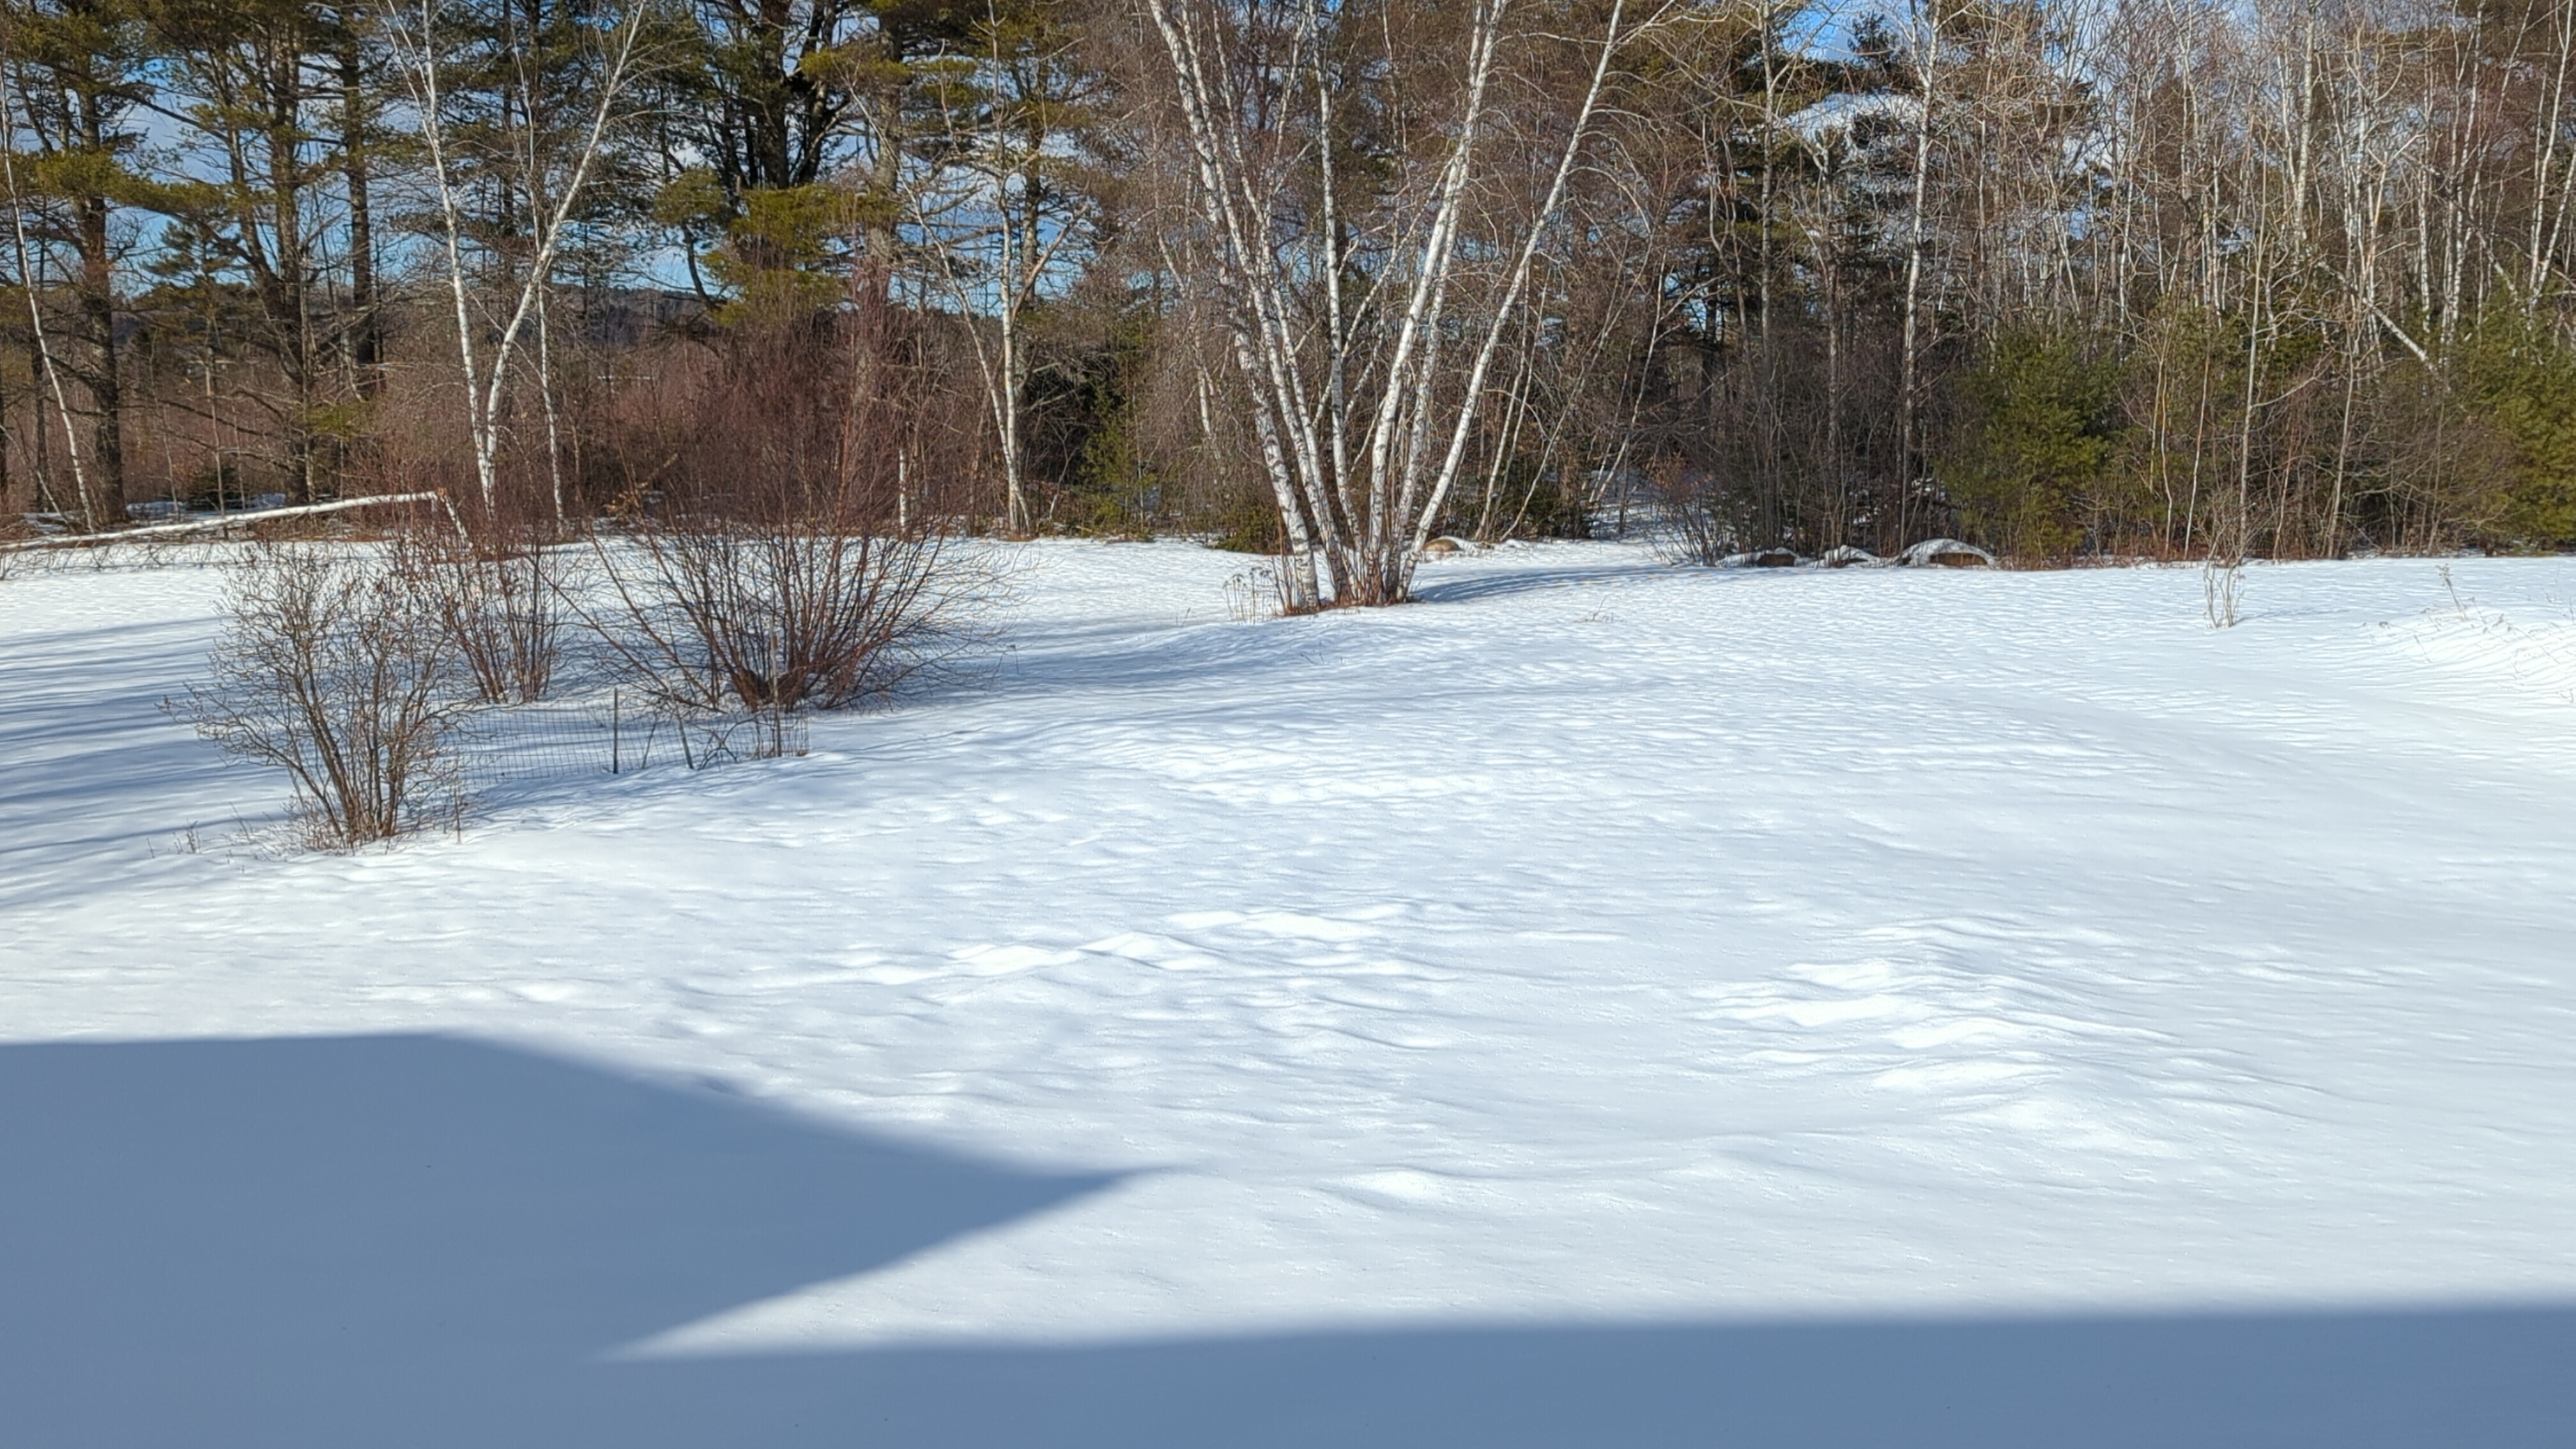 My garden, which is currently covered in about 18 inches of snow